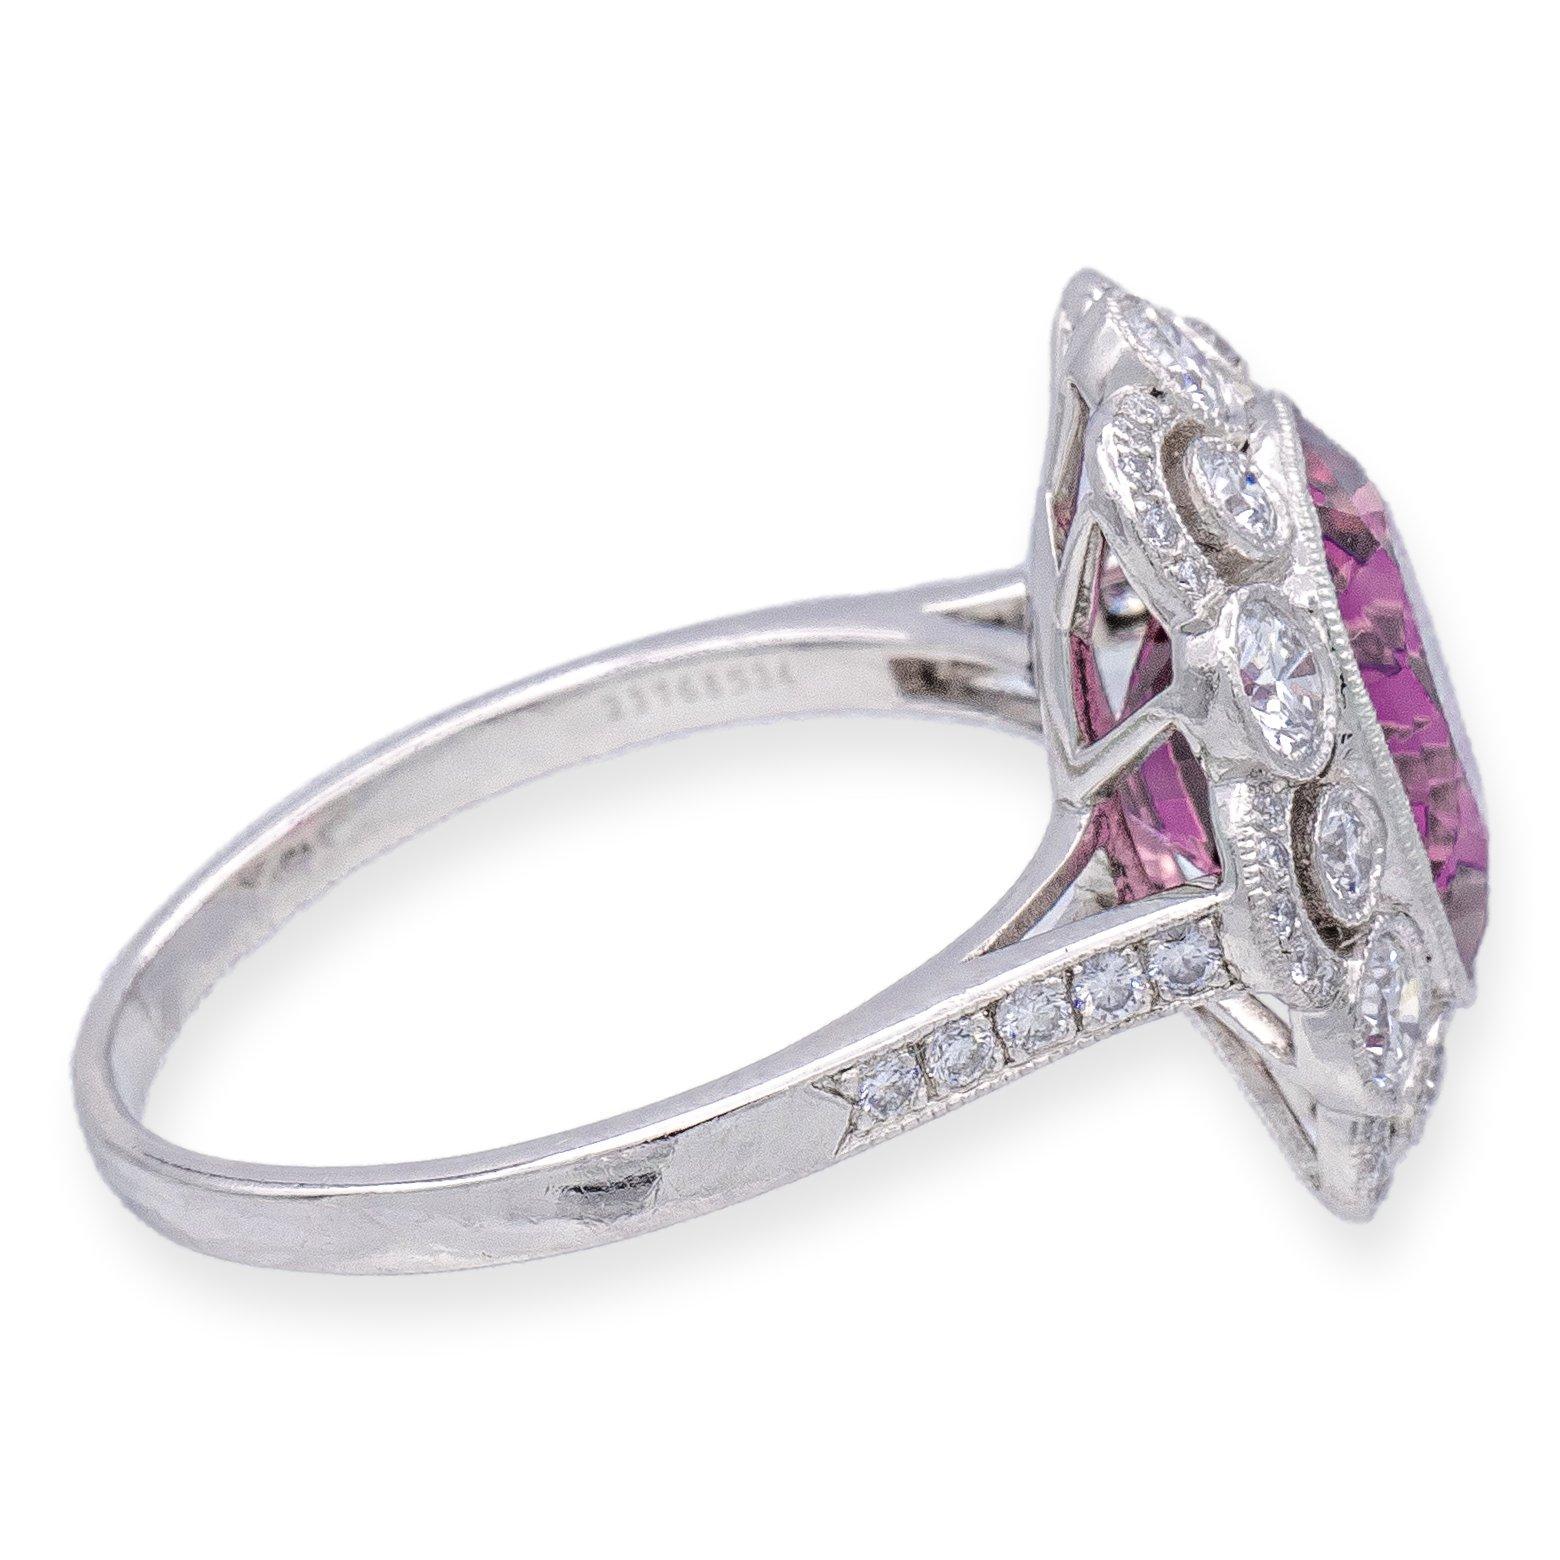 Retro Vintage Tiffany & Co. Platinum Oval 5.20ct Pink Spinel and Diamond Ring